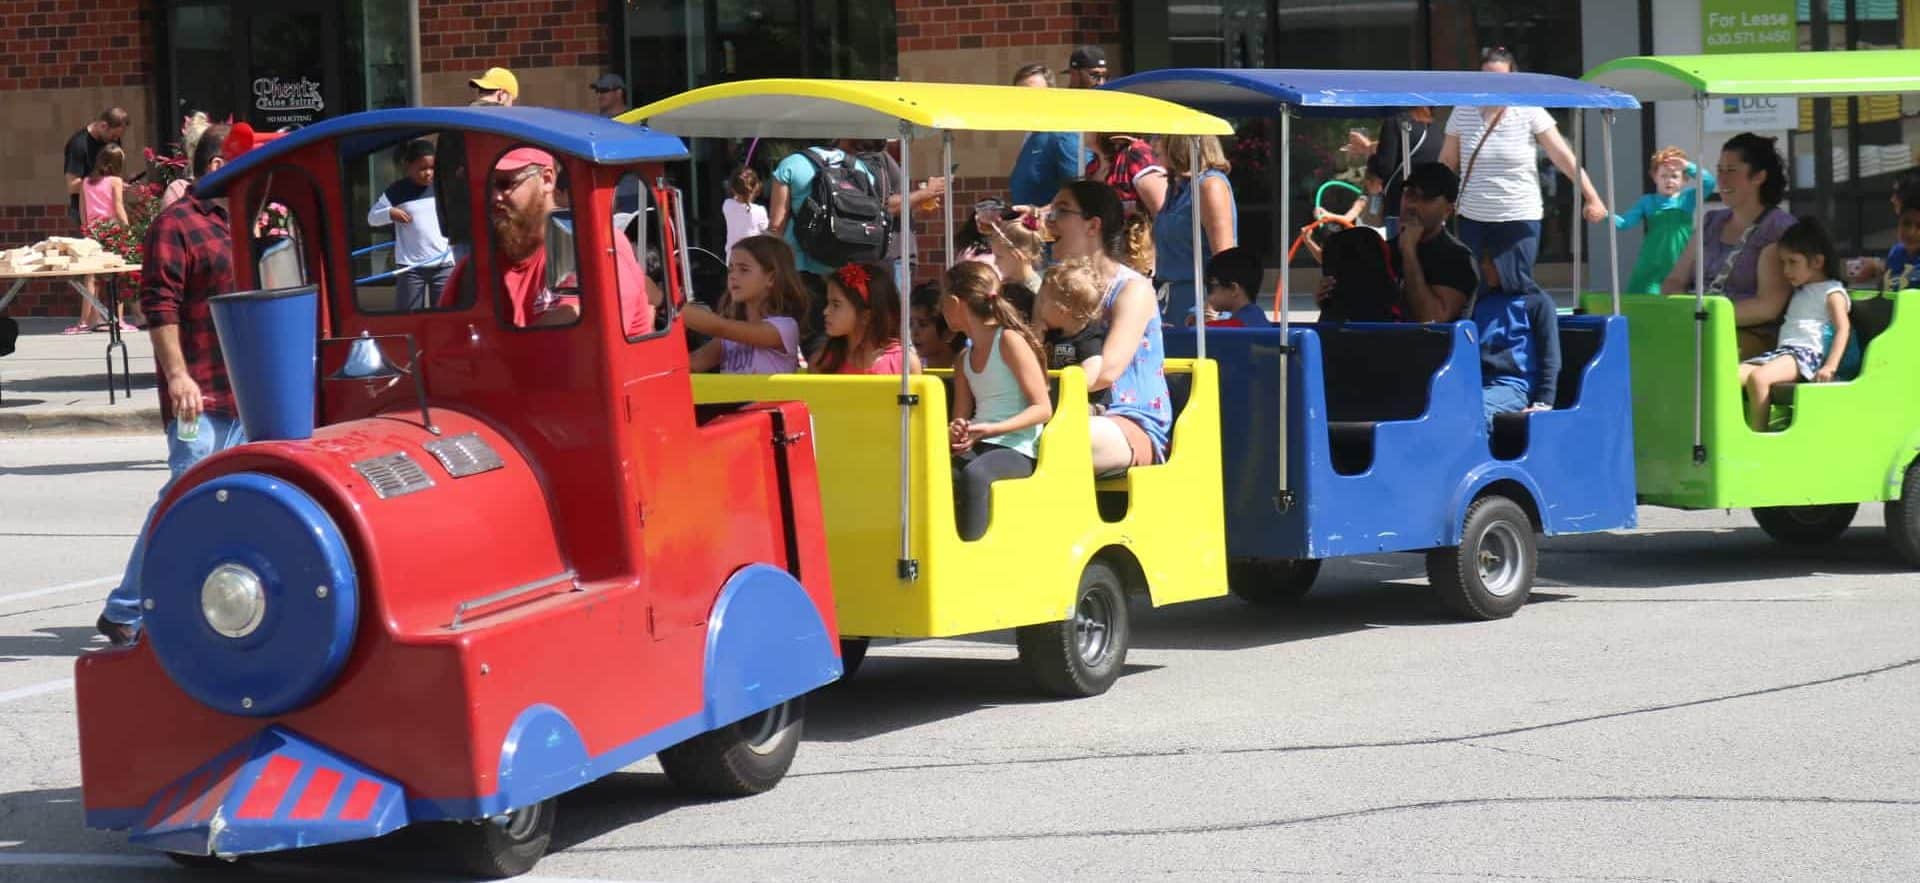 Children and parents on a colorful train ride